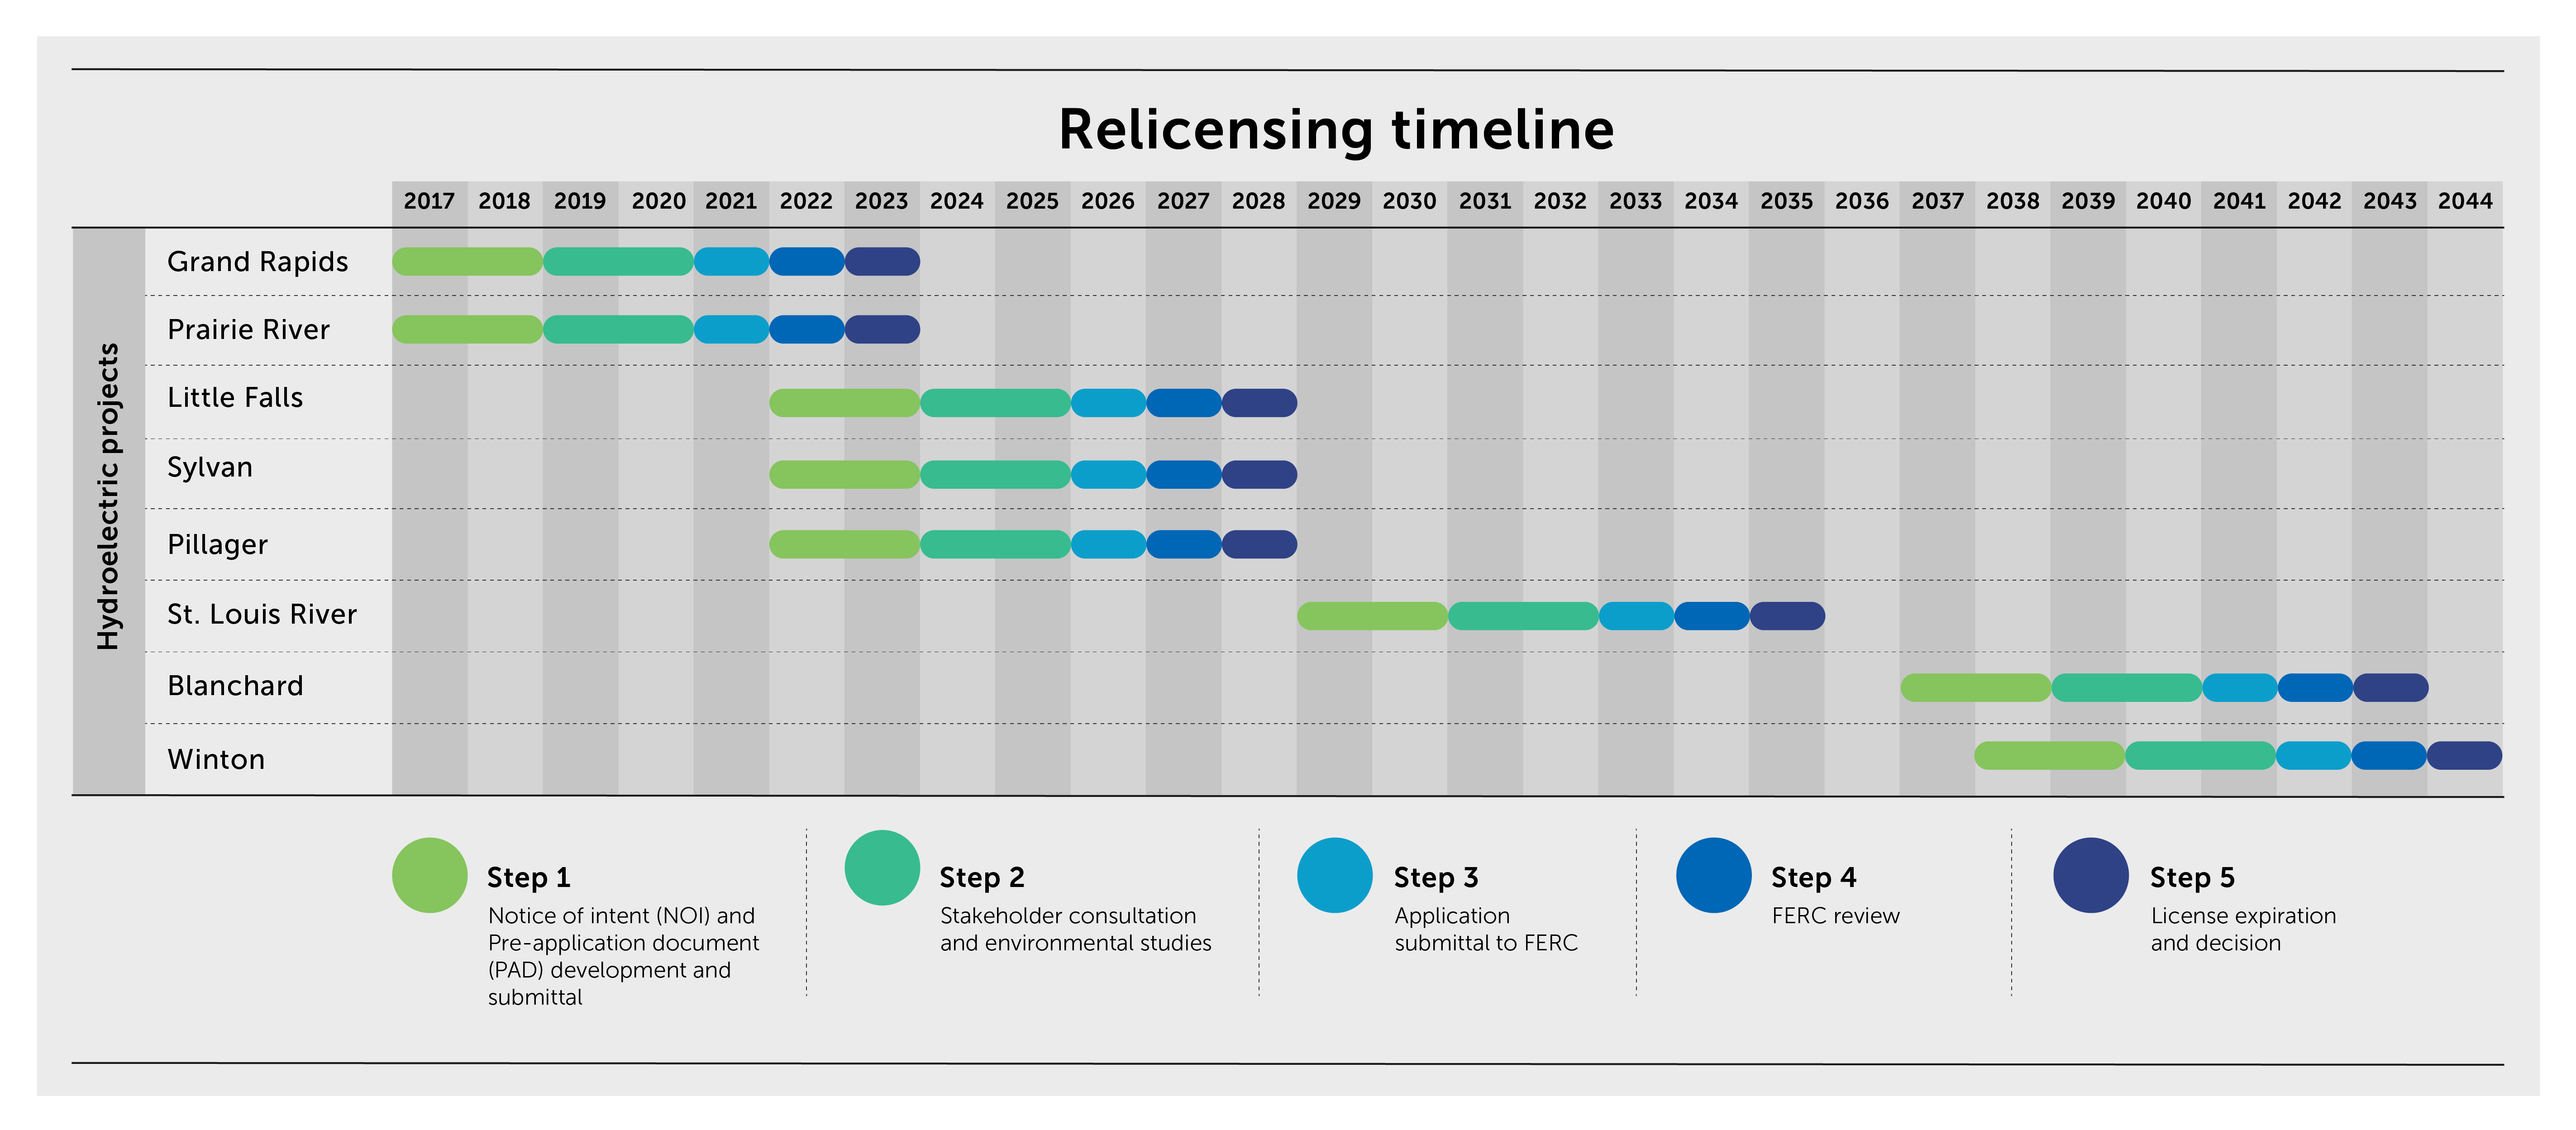 Relicensing for our facilities will be completed in phases between 2017 and 2044. (Click image to view larger.)